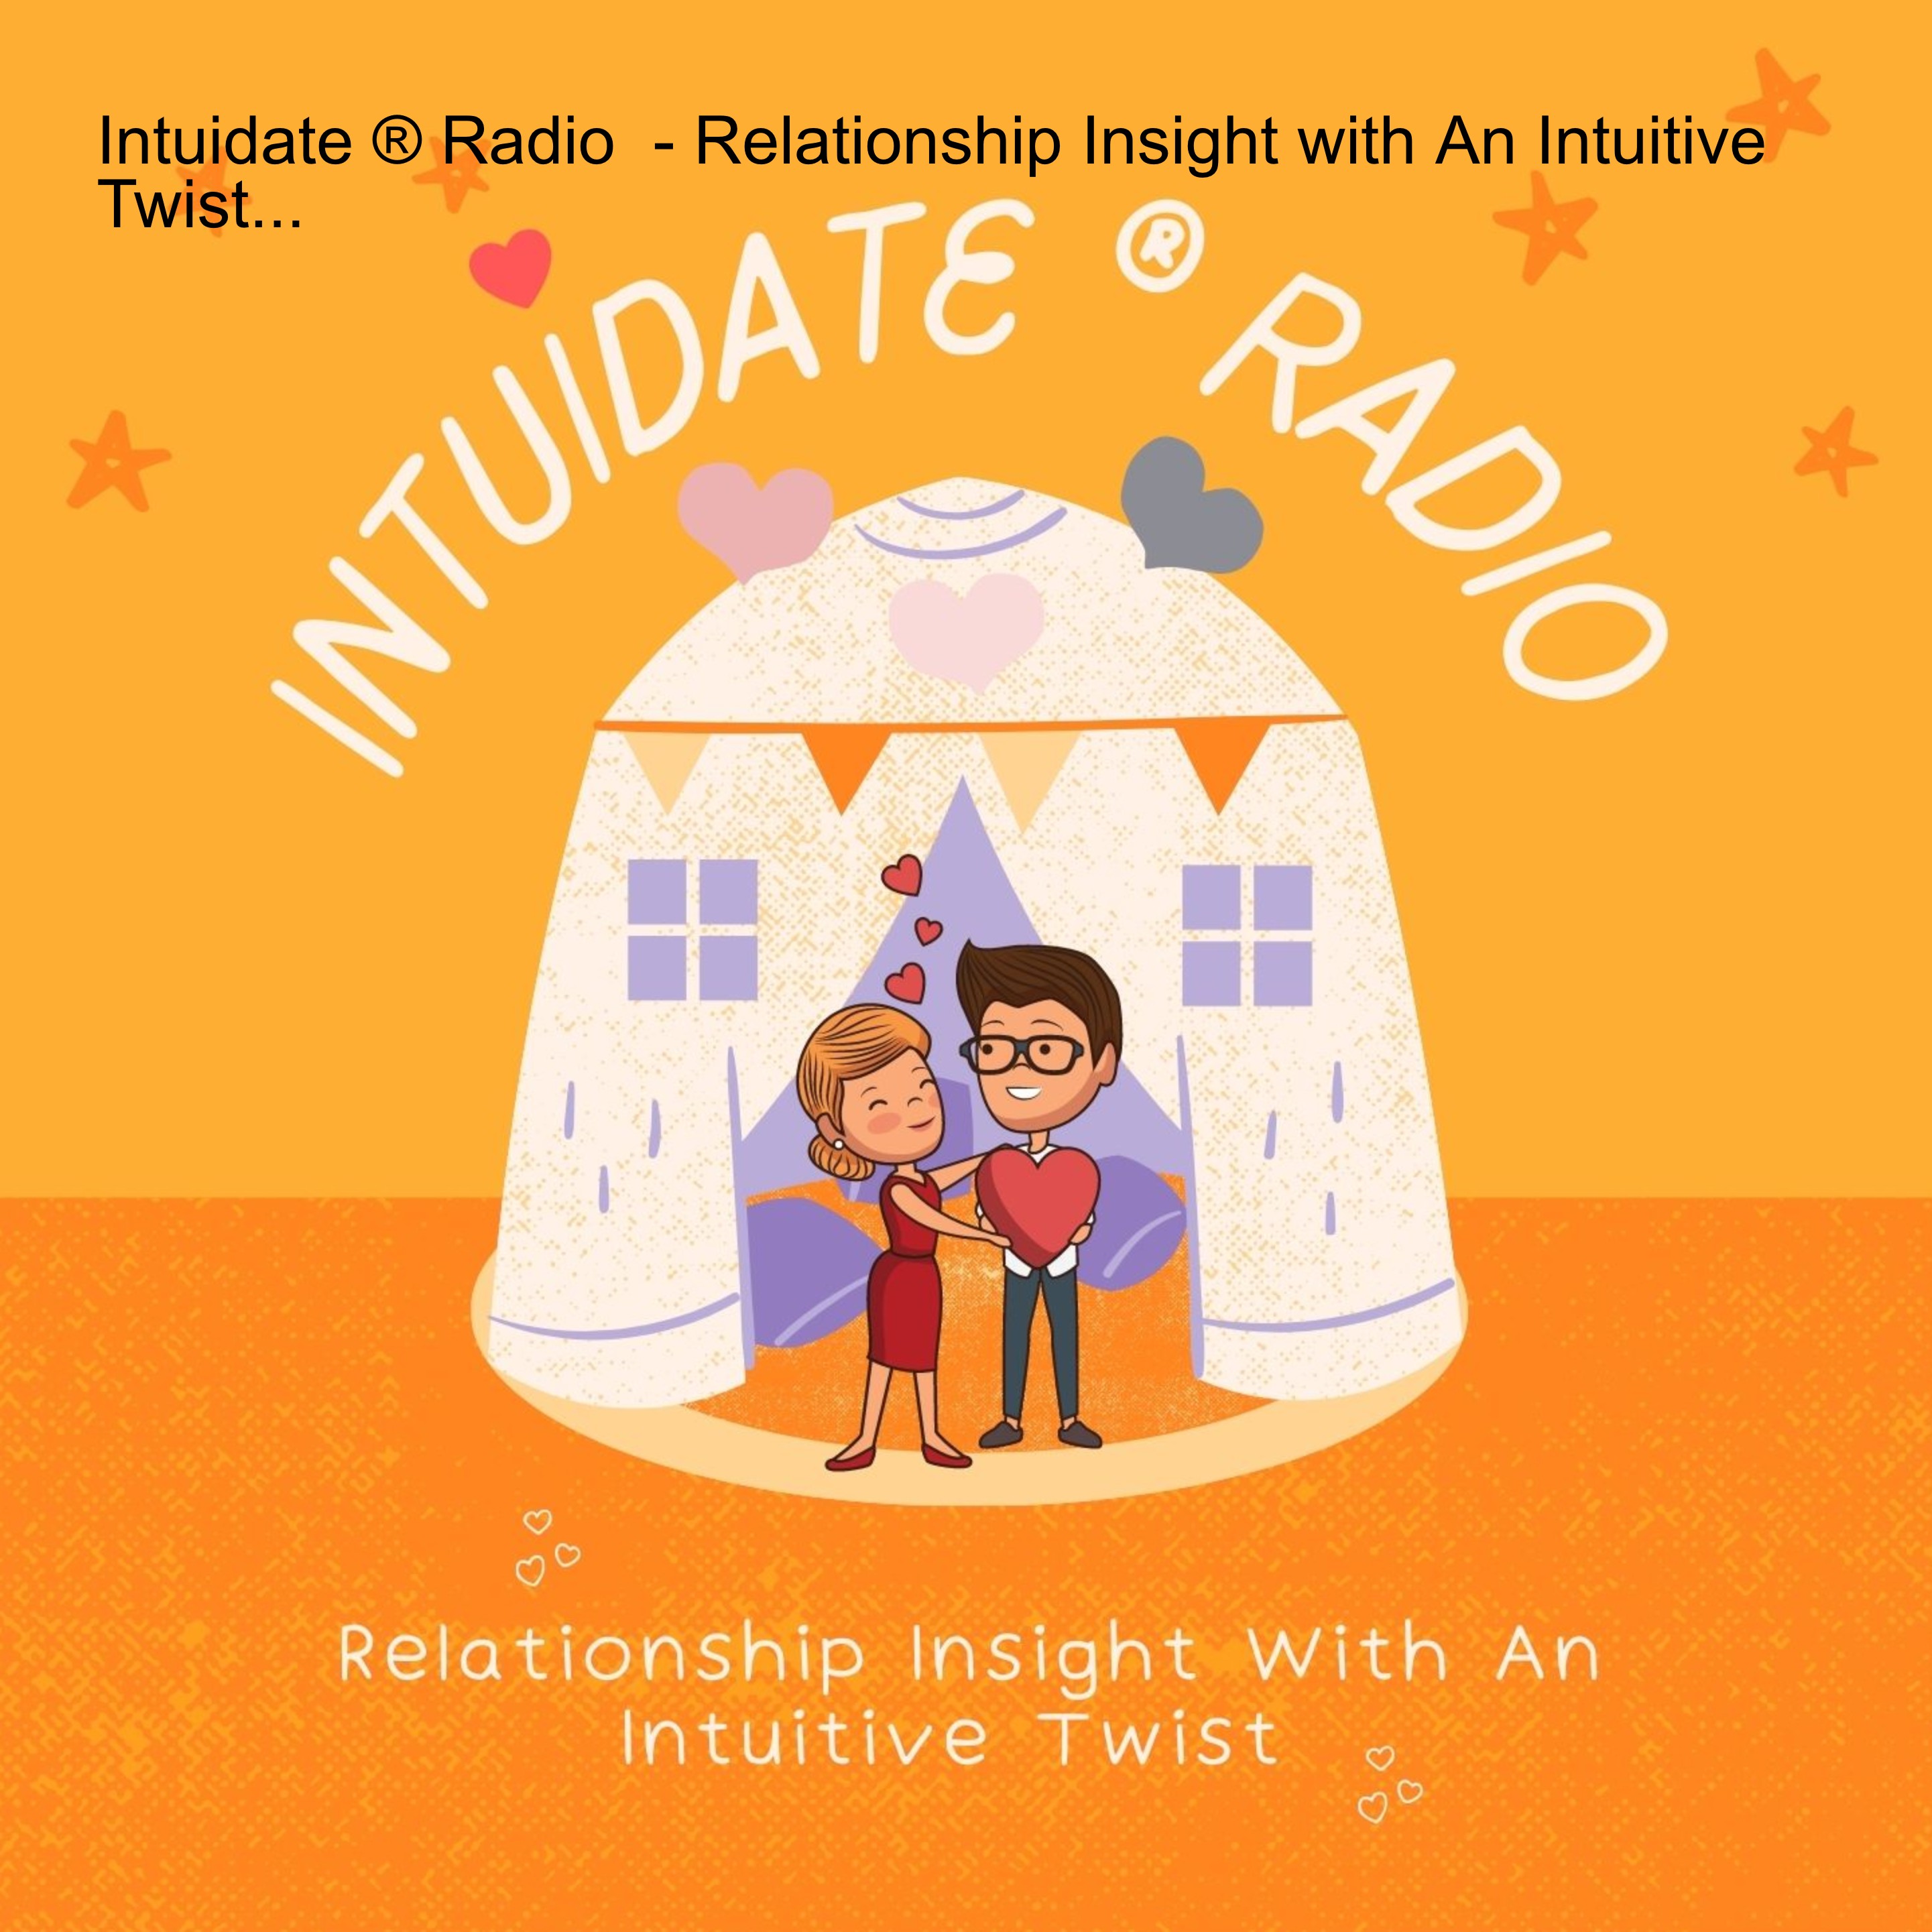 Intuidate ® Radio  - Relationship Insight with An Intuitive Twist...